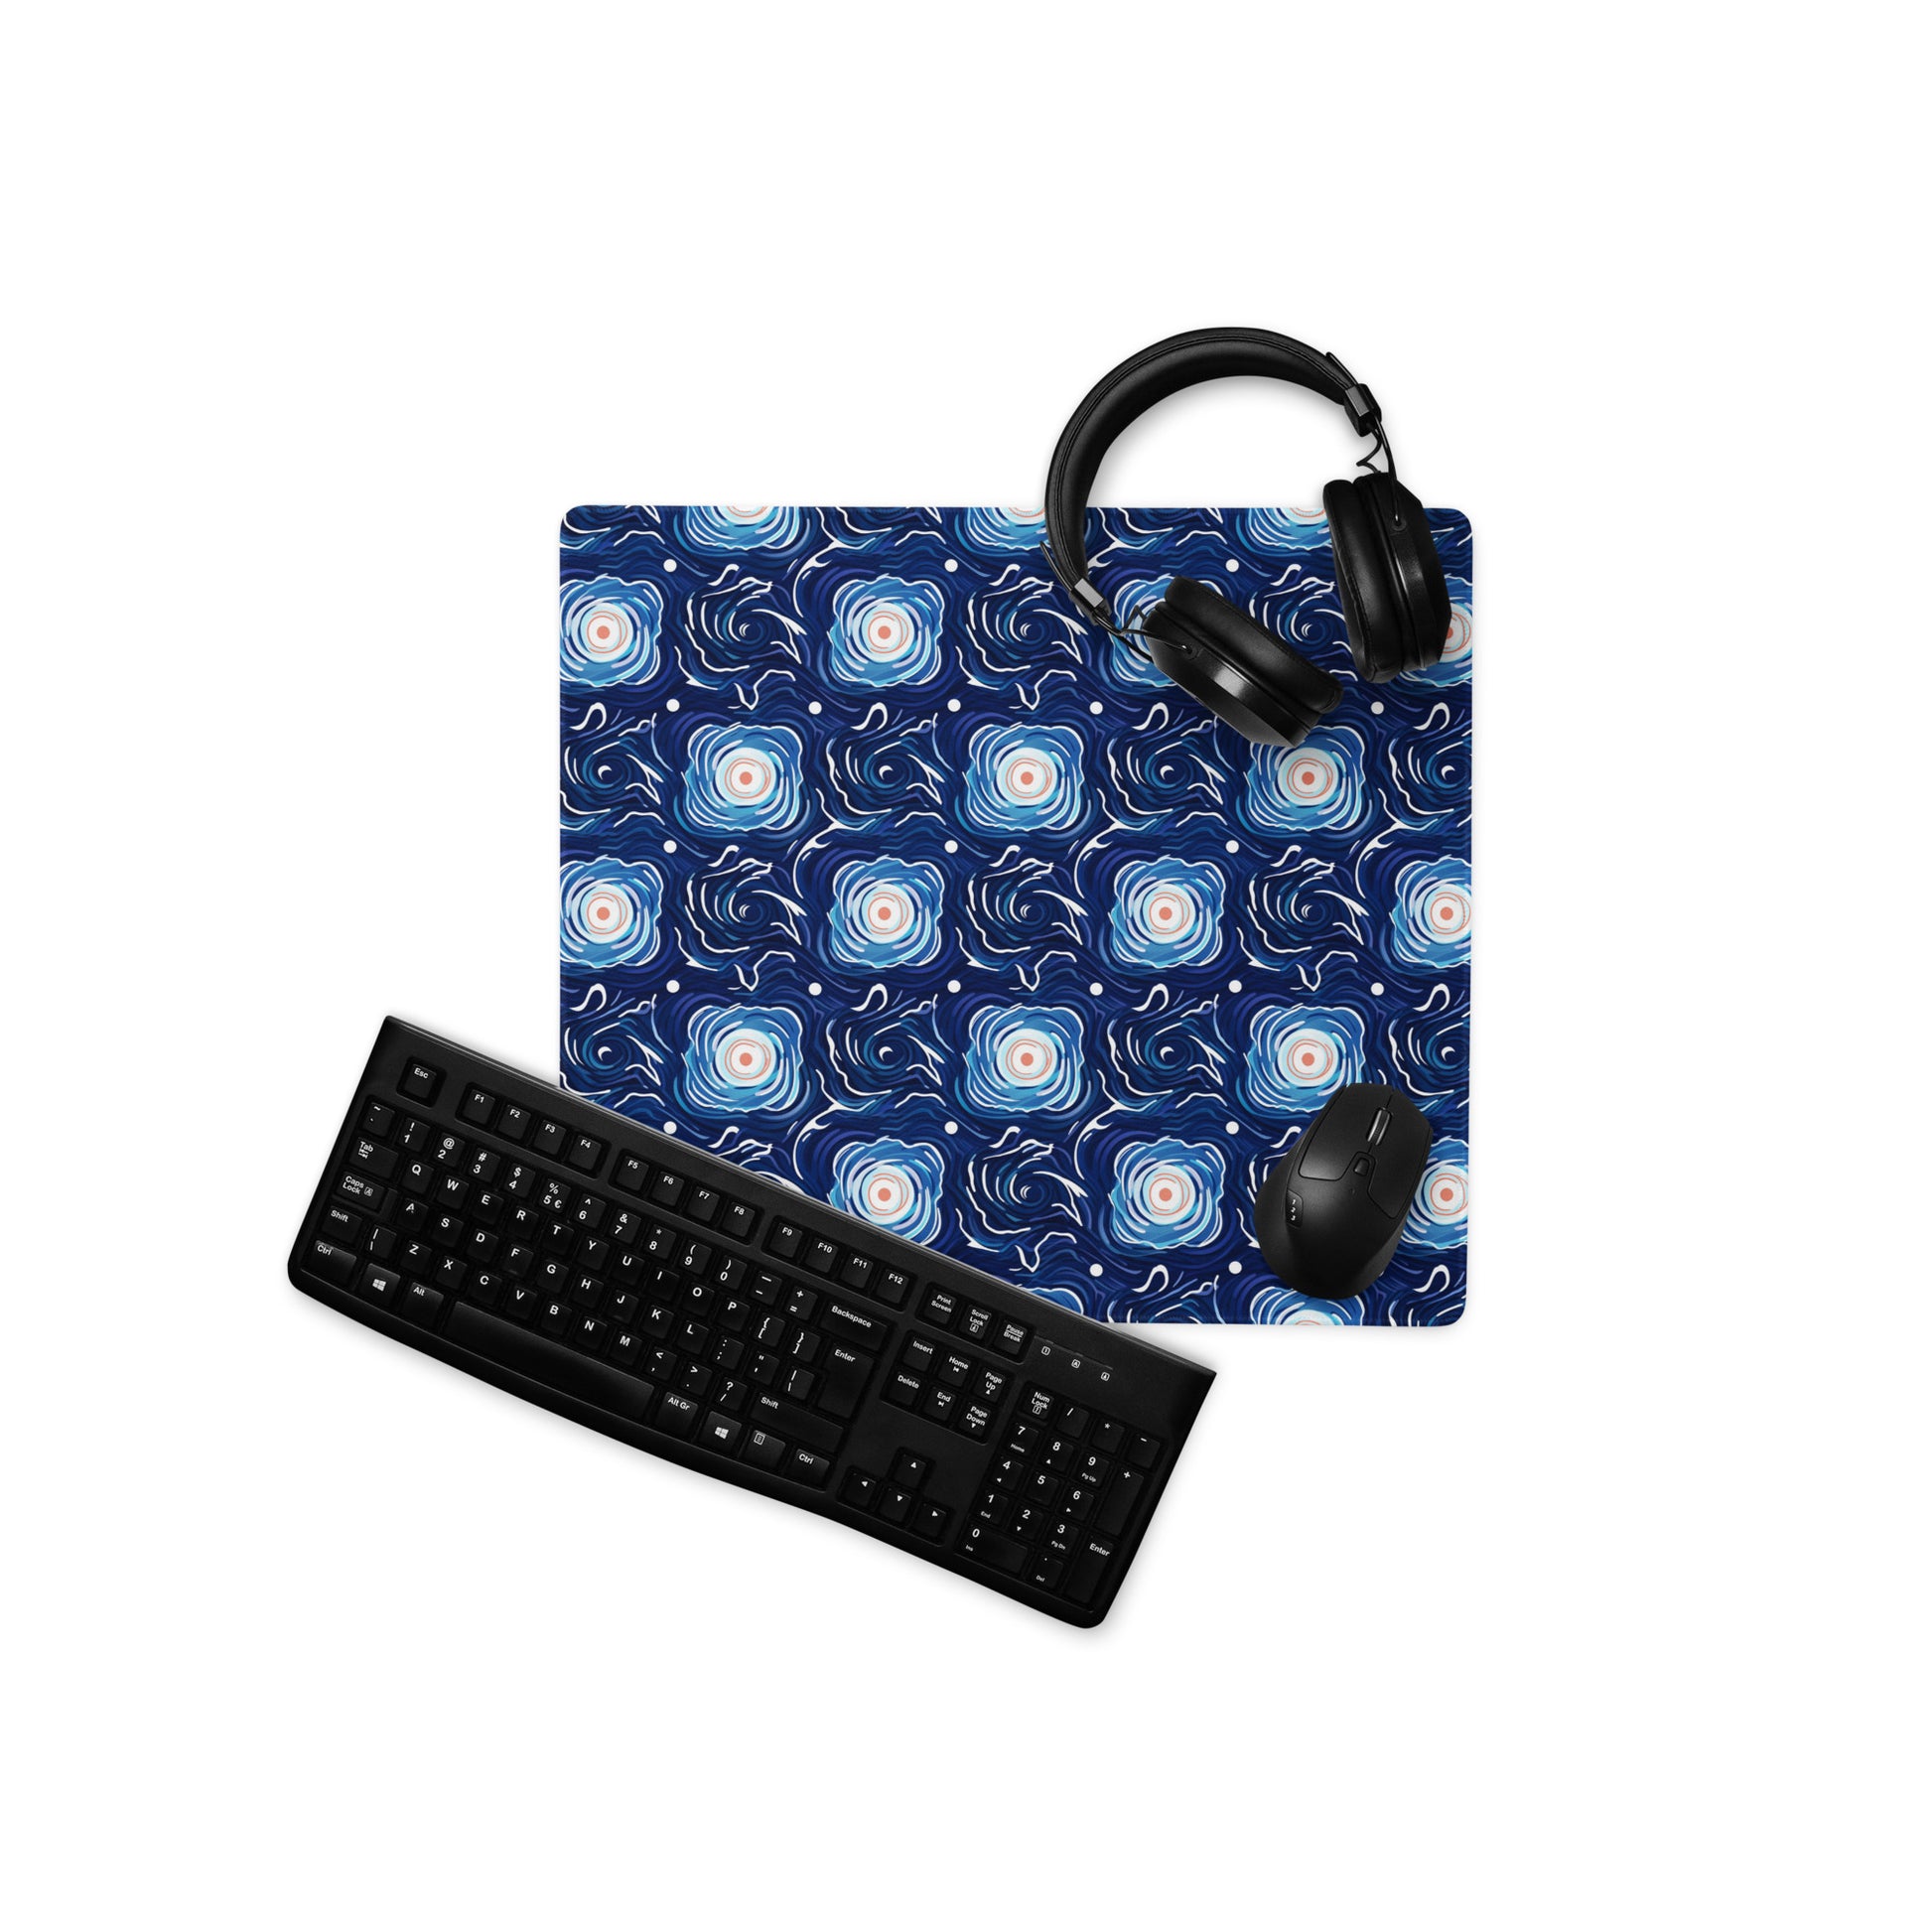 A 18" x 16" desk pad with a blue and white floral pattern. With a keyboard, mouse, and headphones sitting on it.